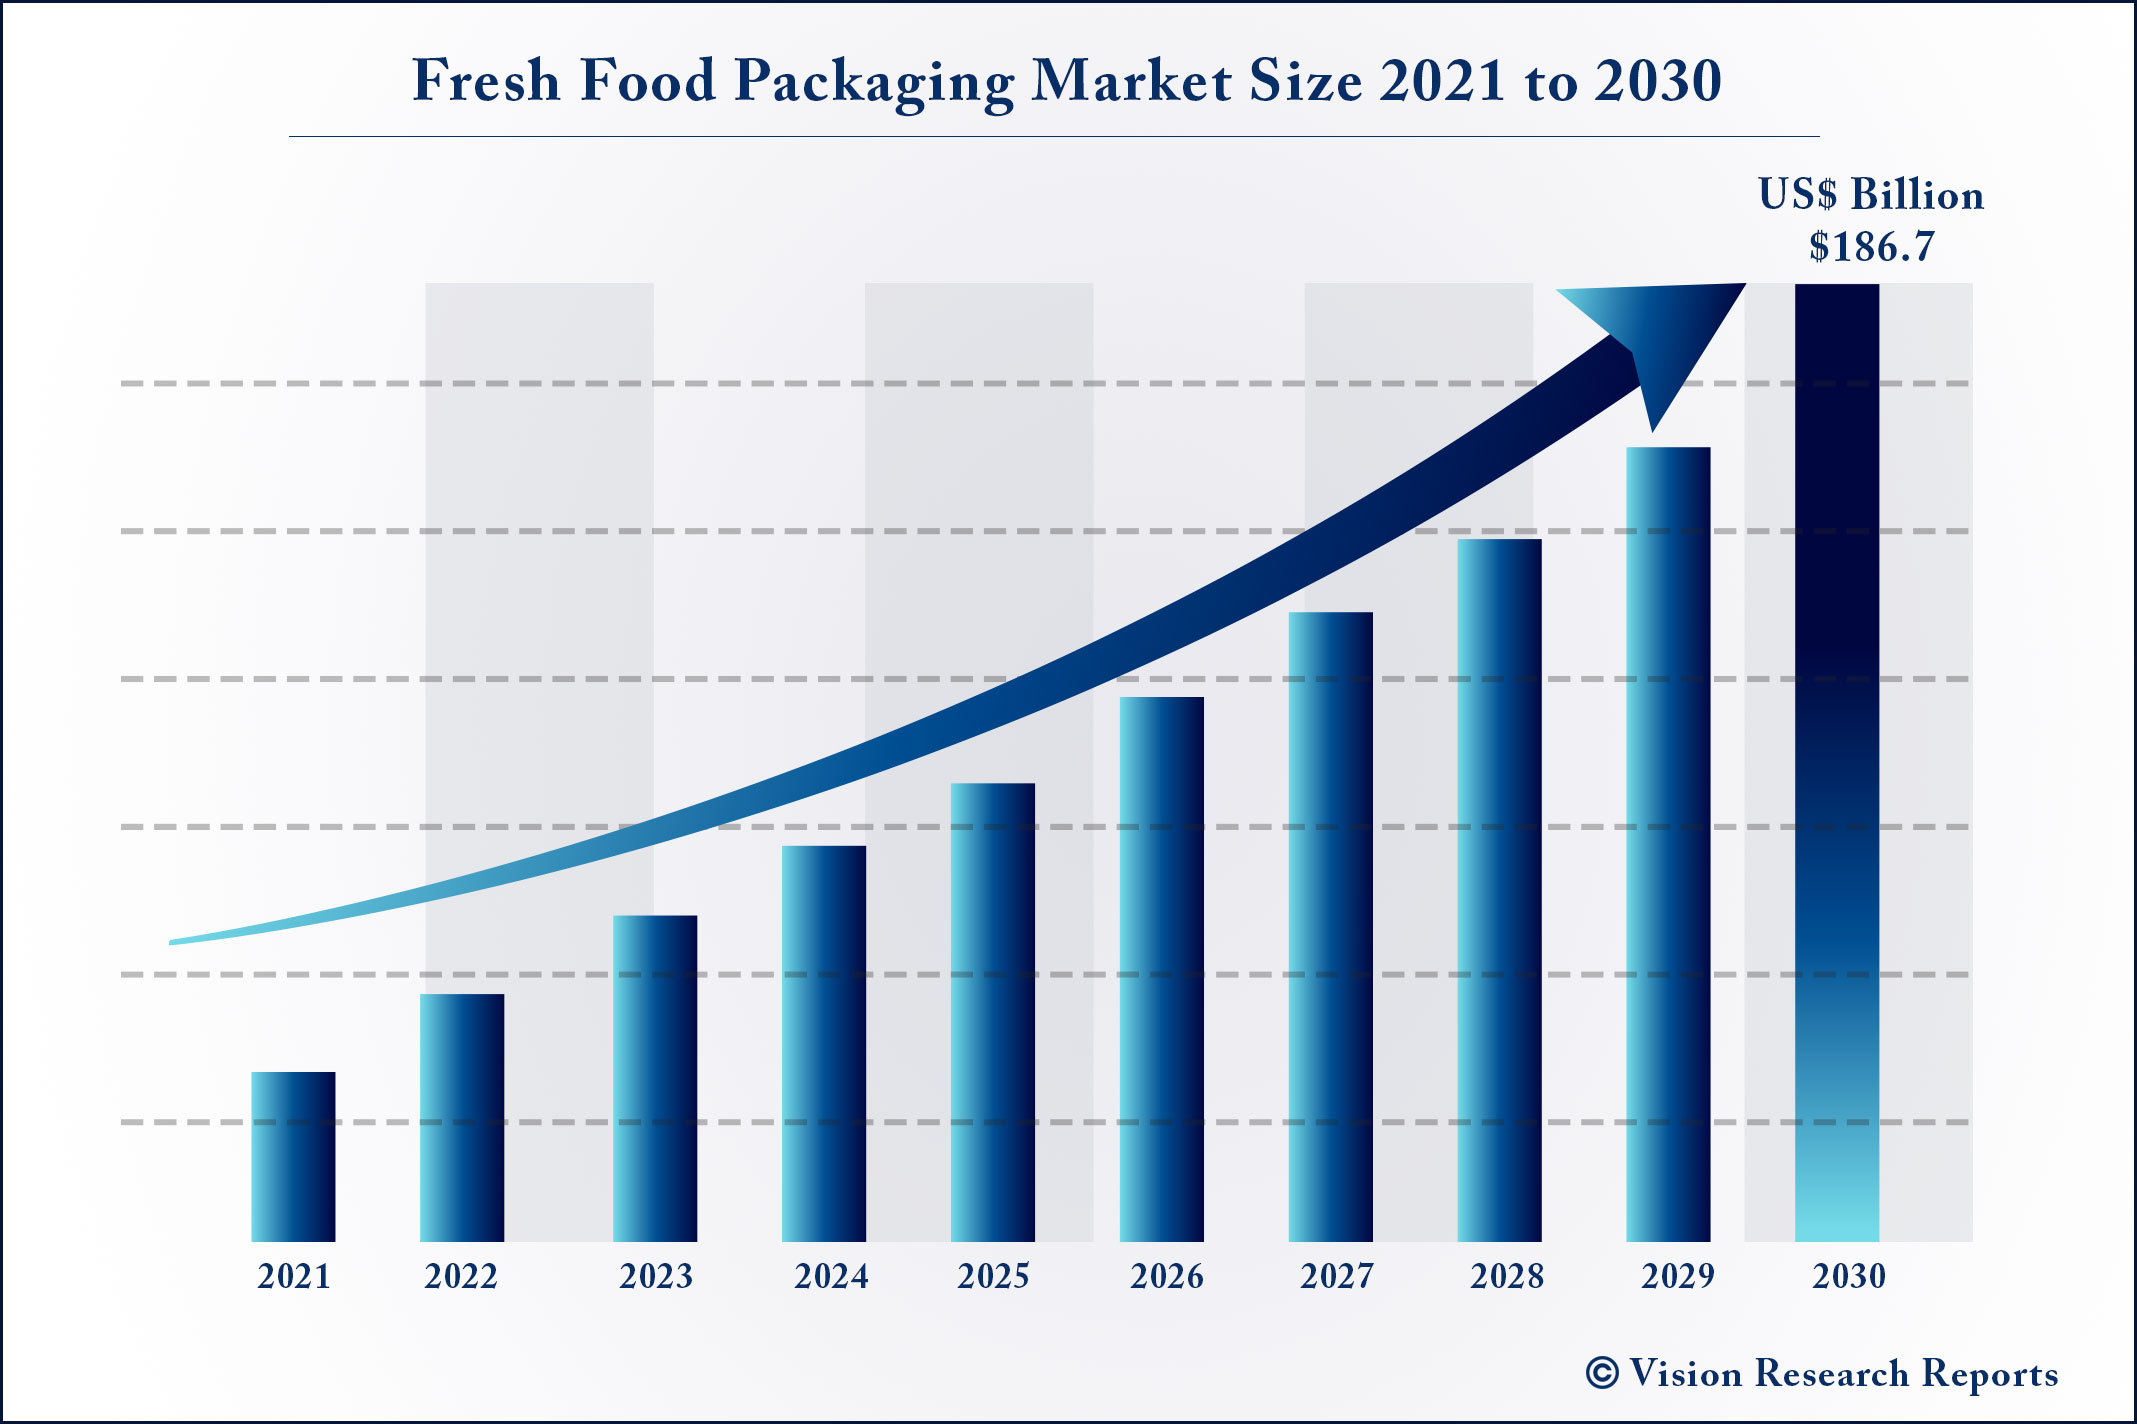 Fresh Food Packaging Market Size 2021 to 2030